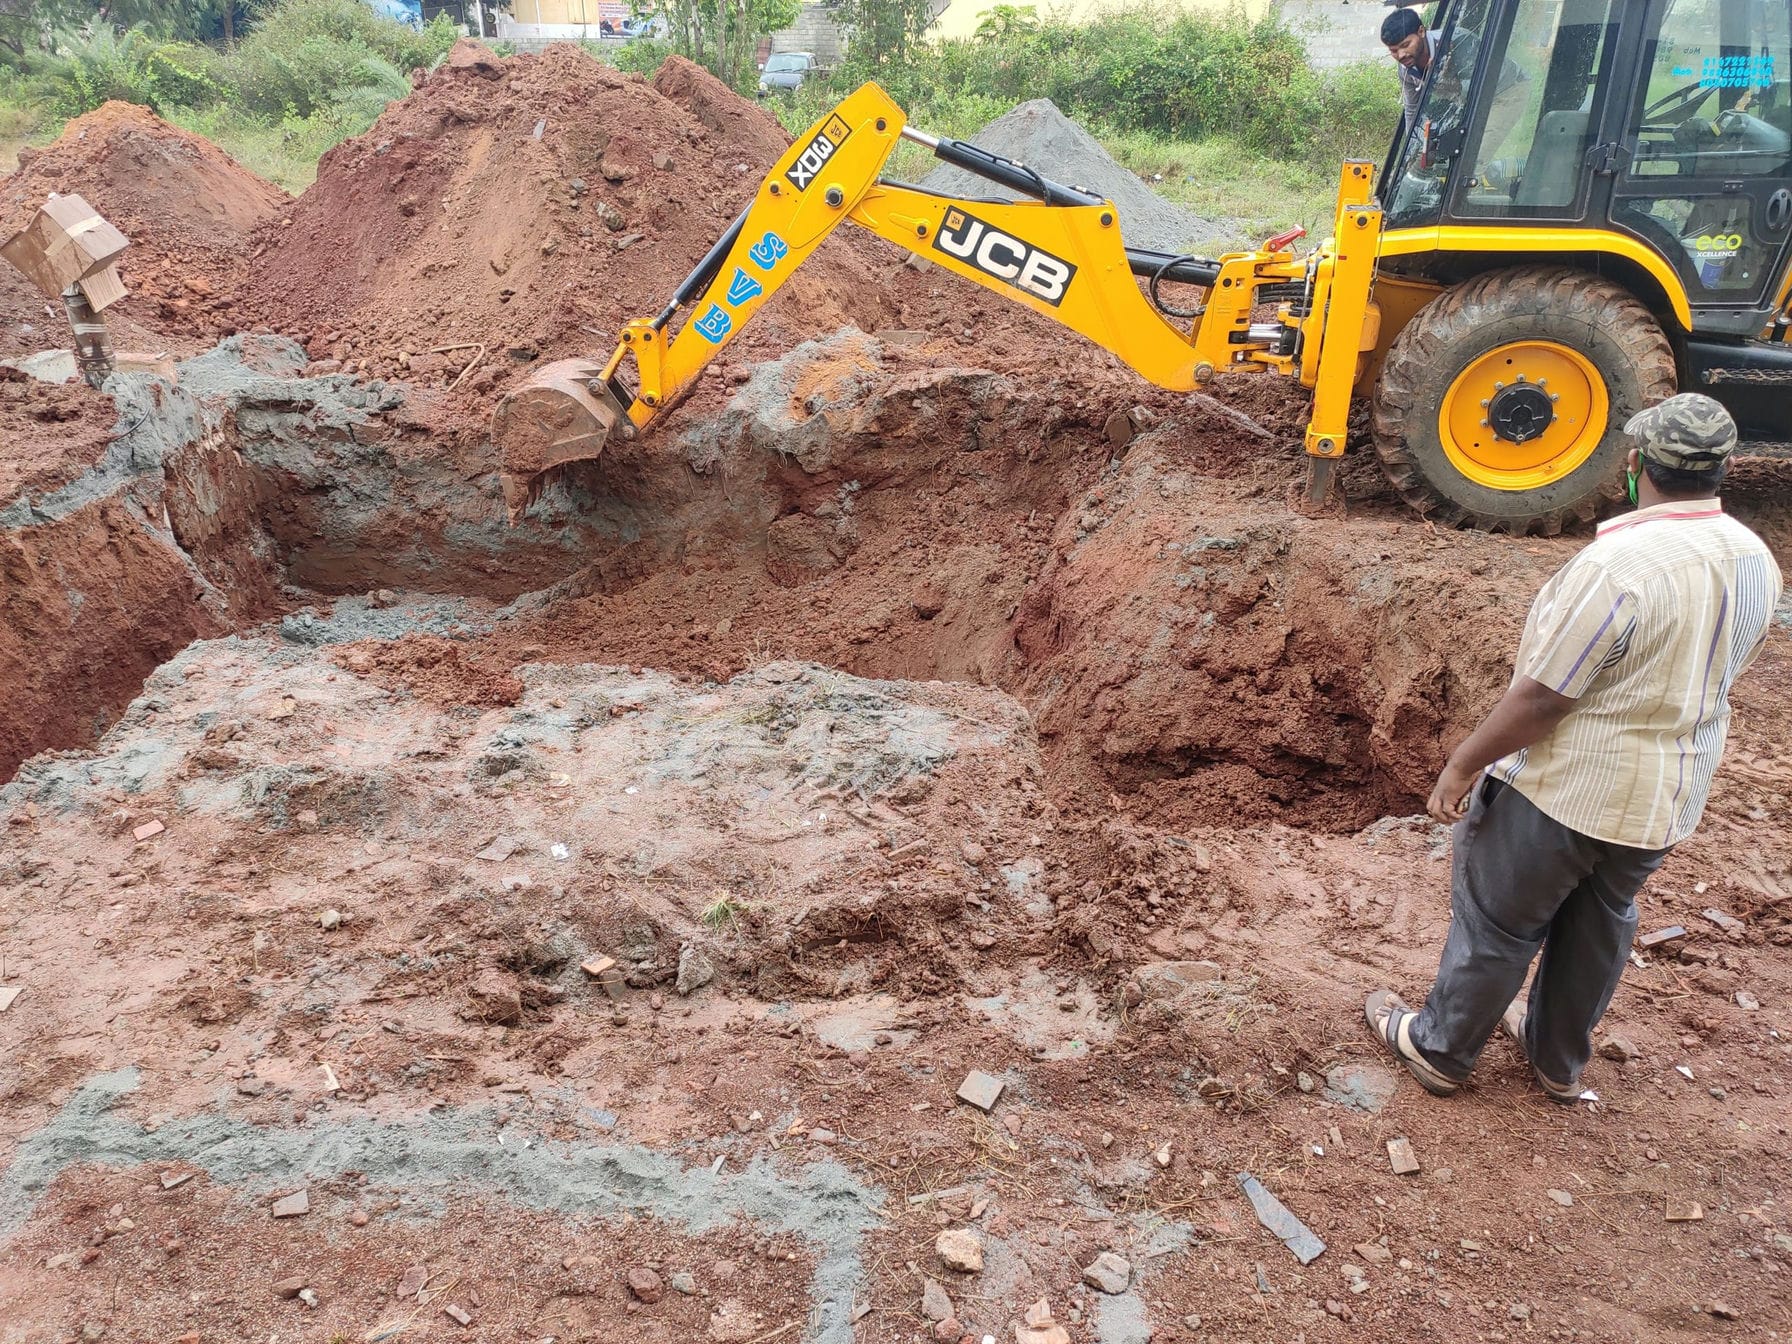 JCB doing earth excavation process